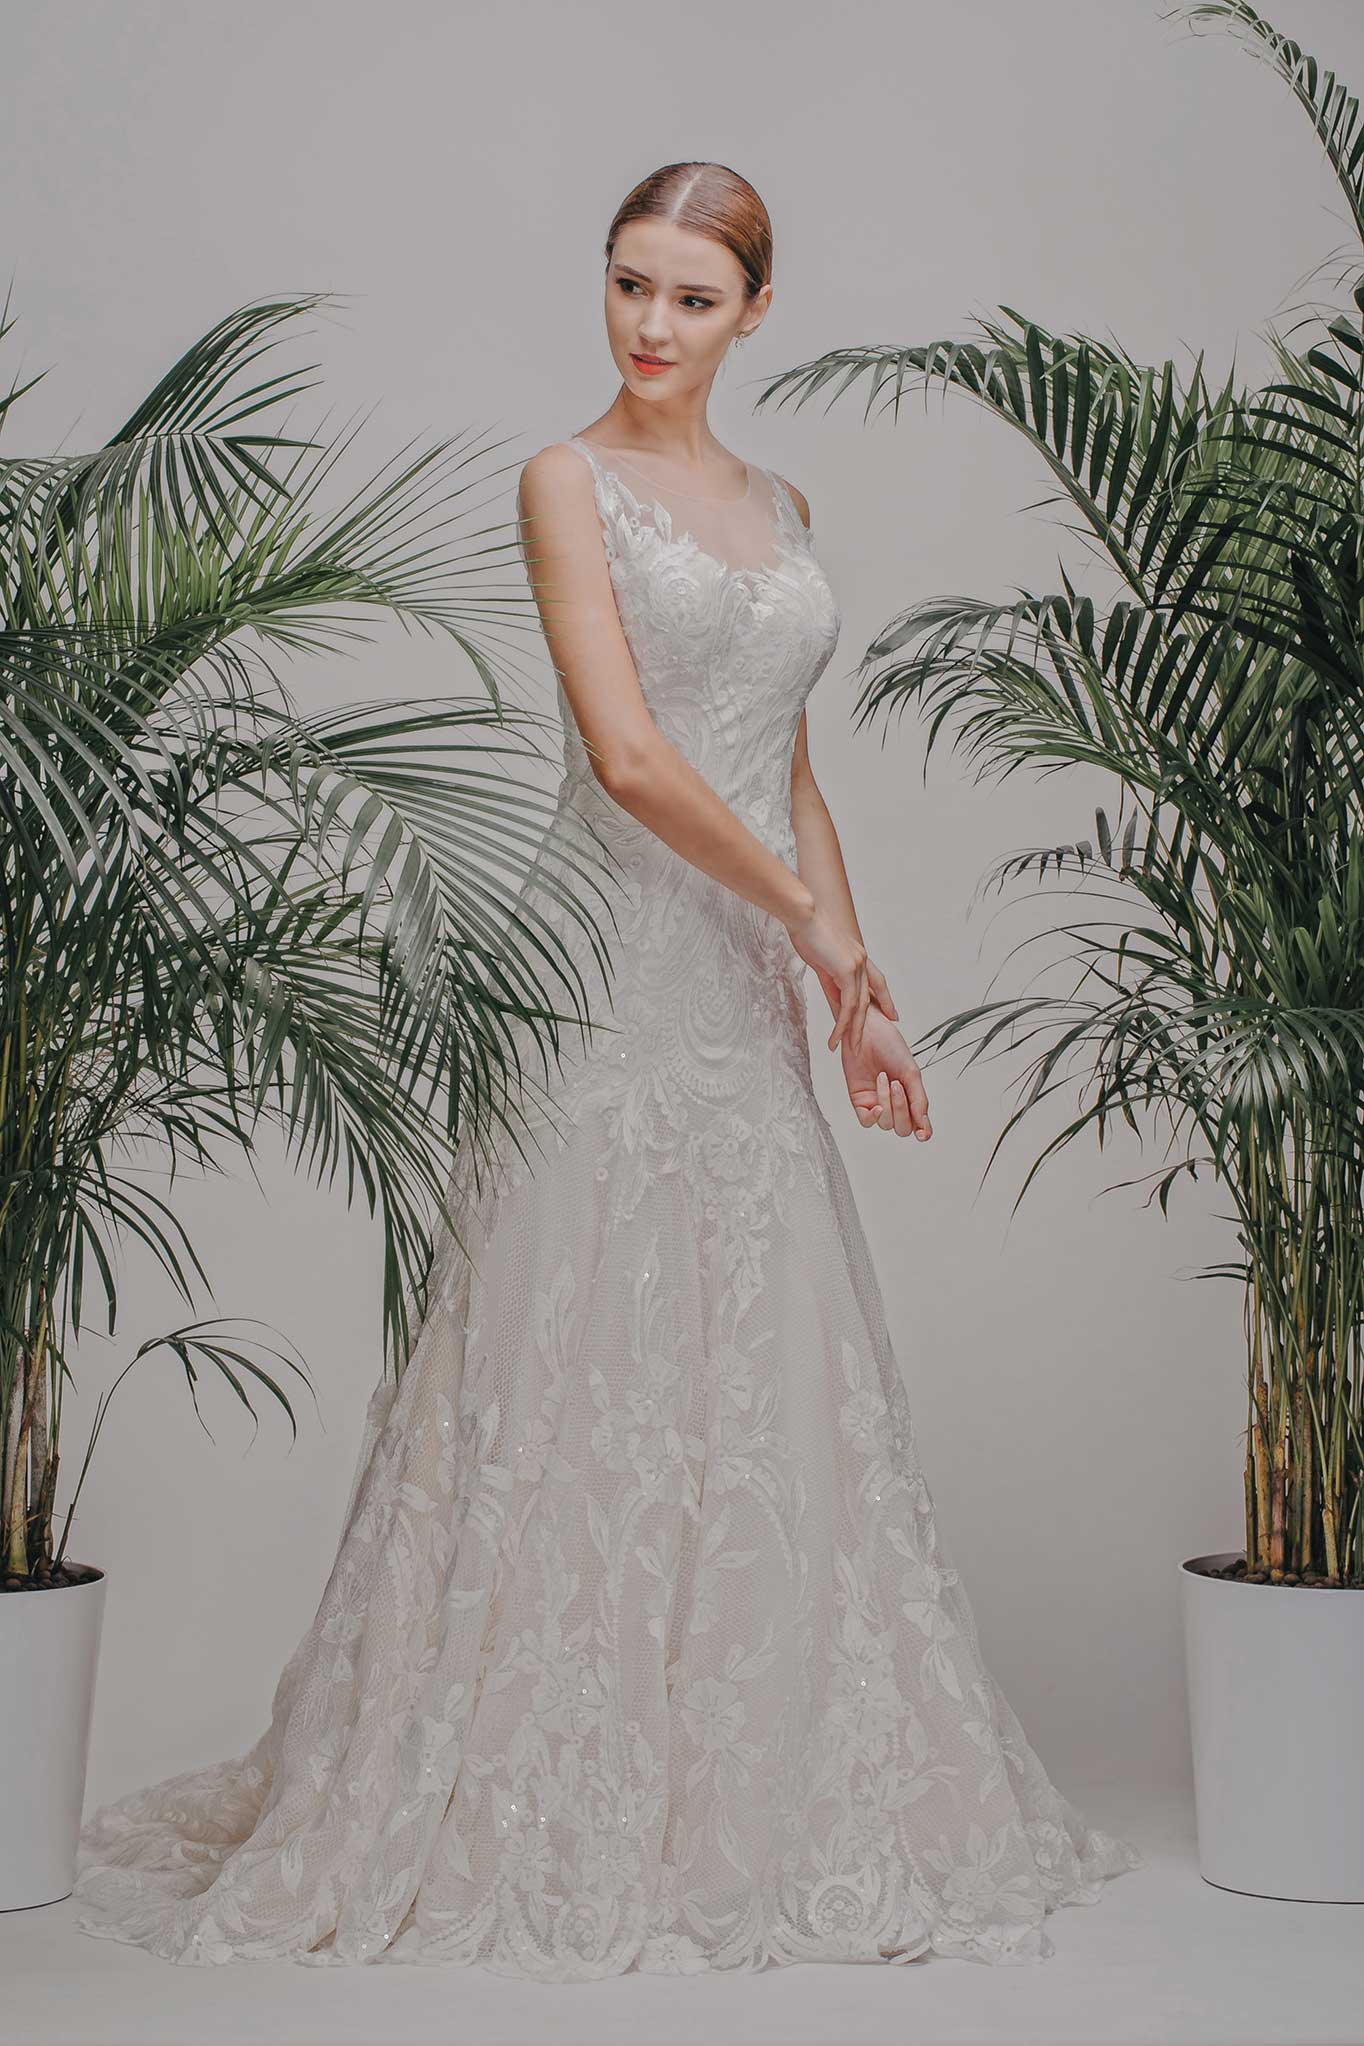 Odeliabridal-gown-collection-19_